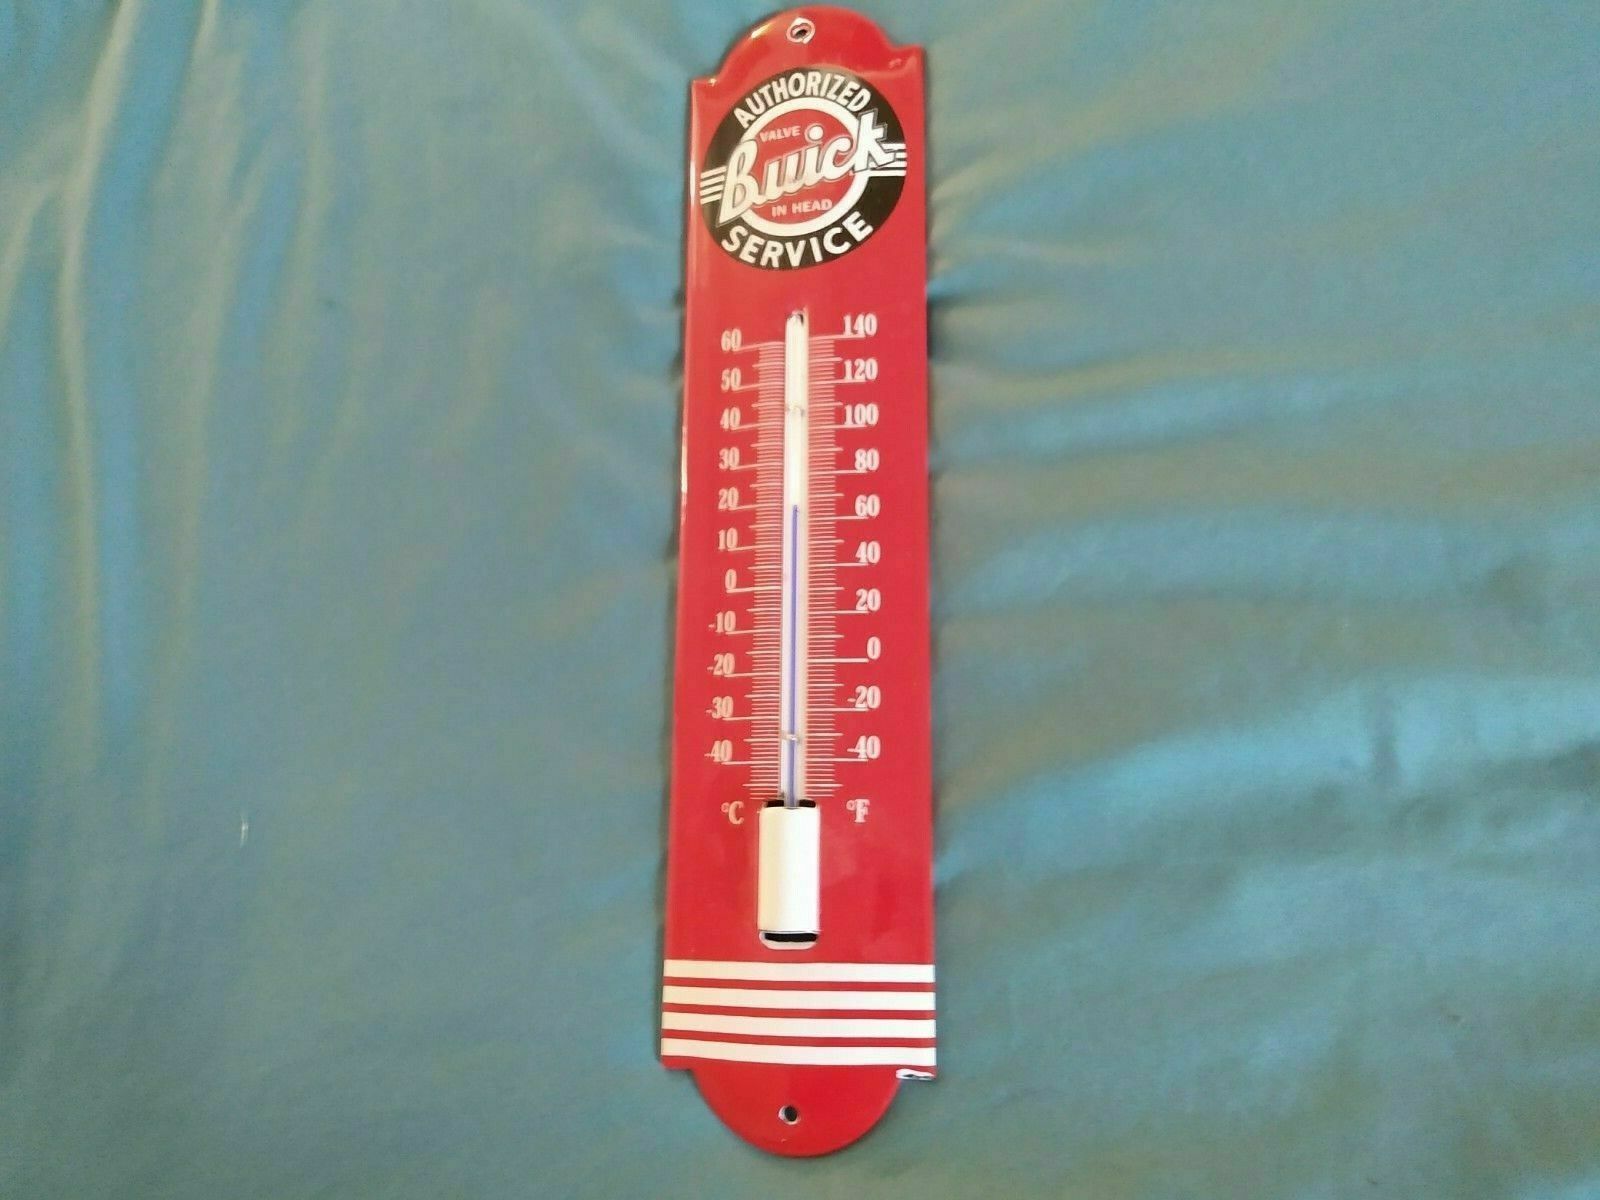 Porcelain Buick Authorized Service Wall Thermometer Shop Garage Temp Gauge